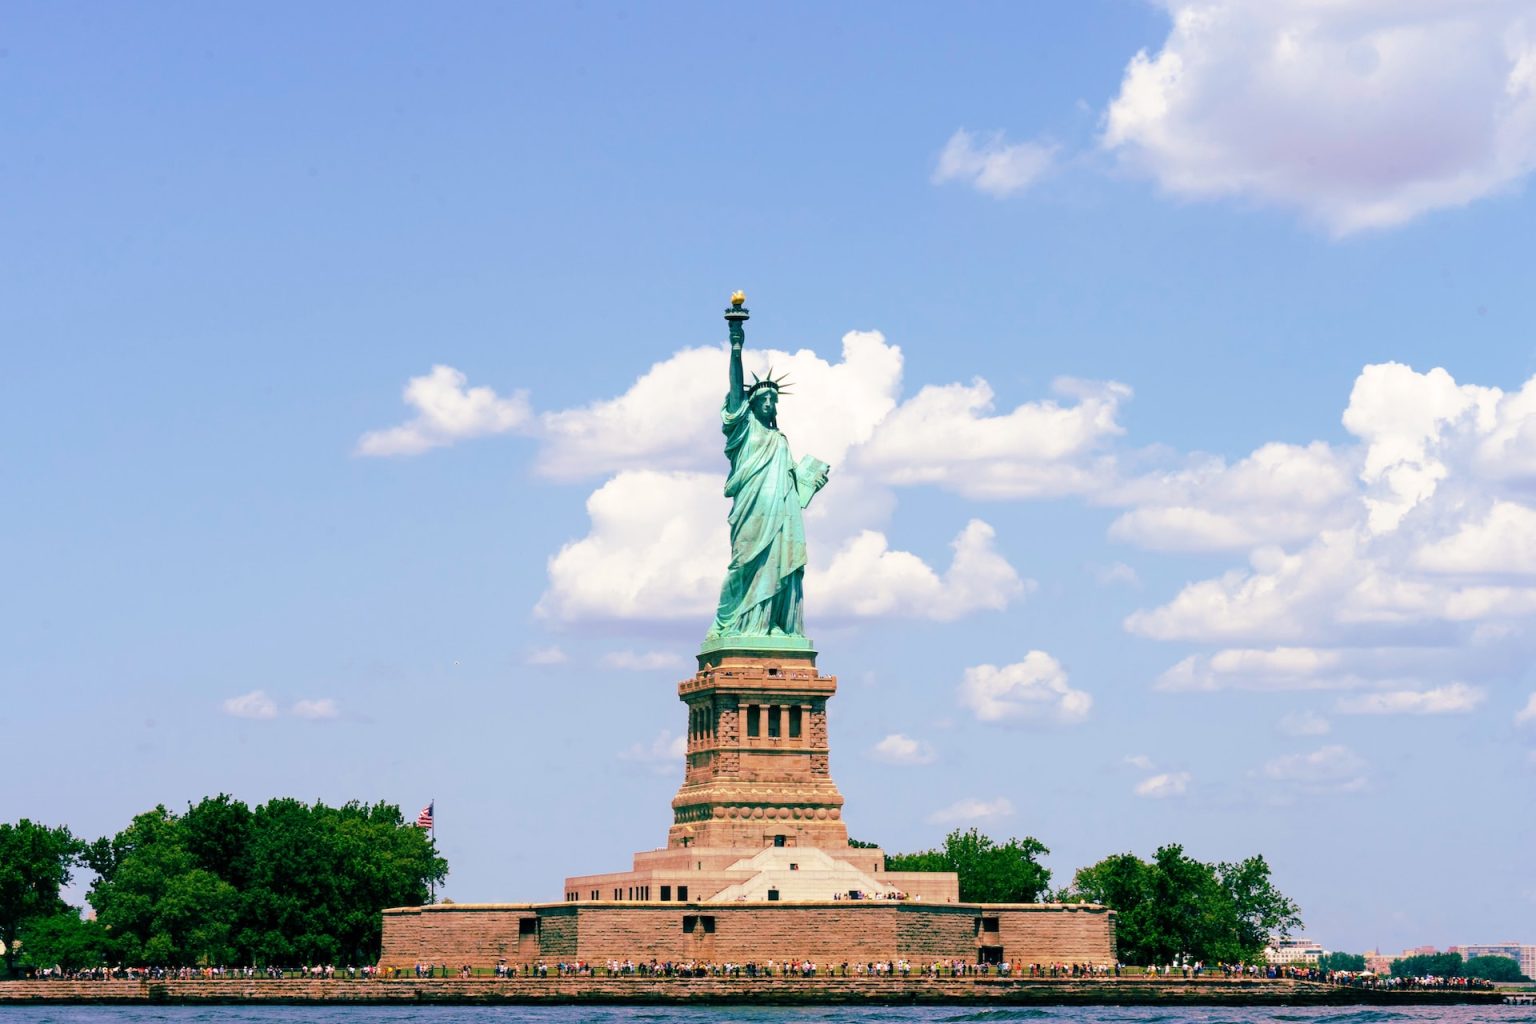 Photo of the statue of liberty taken from the hudson river.